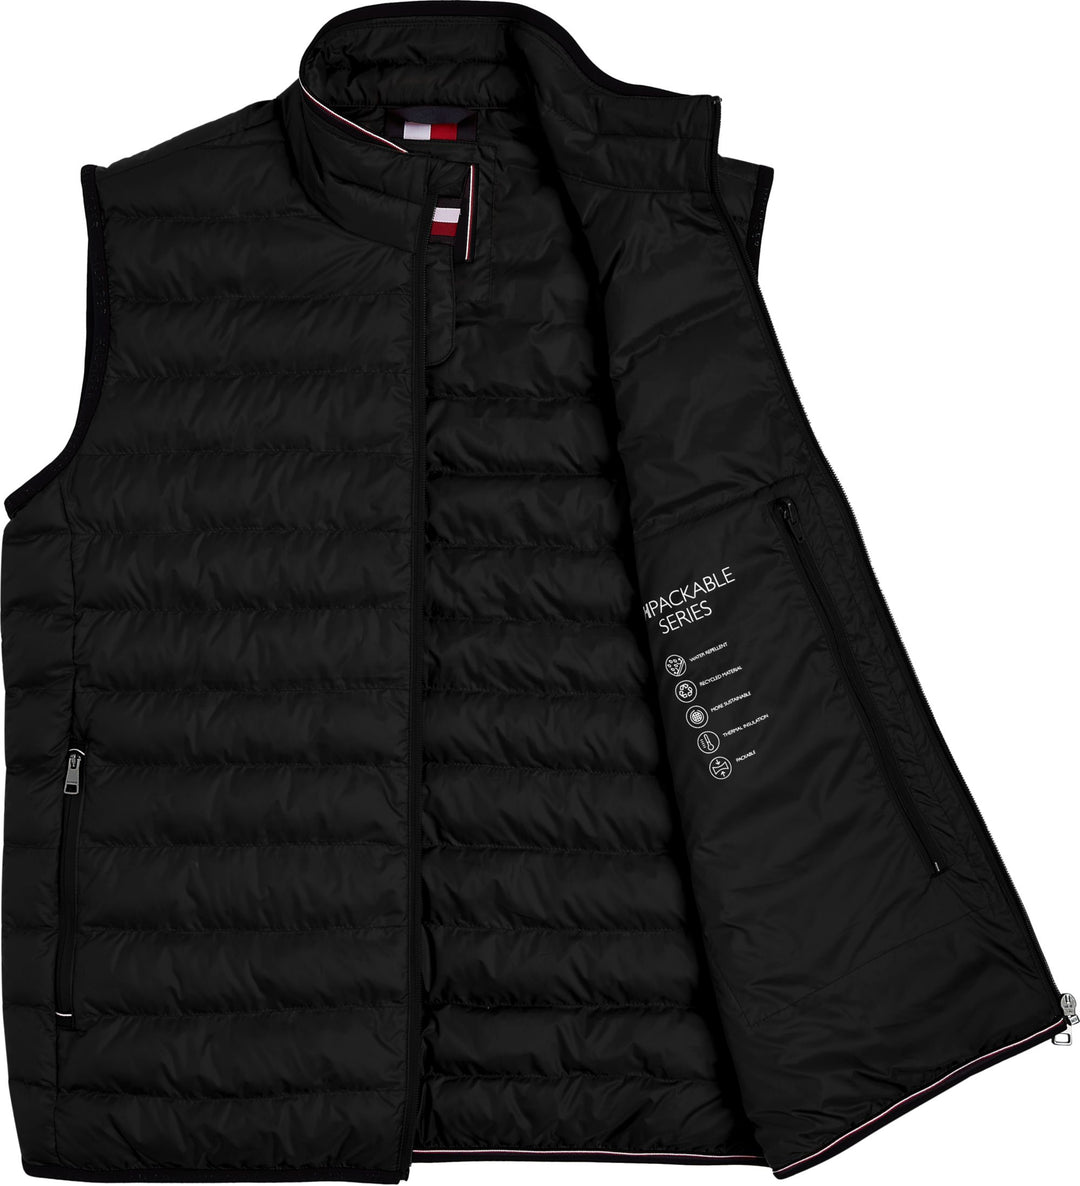 TH BT-PACKABLE RECYCLED VEST-B - BLACK